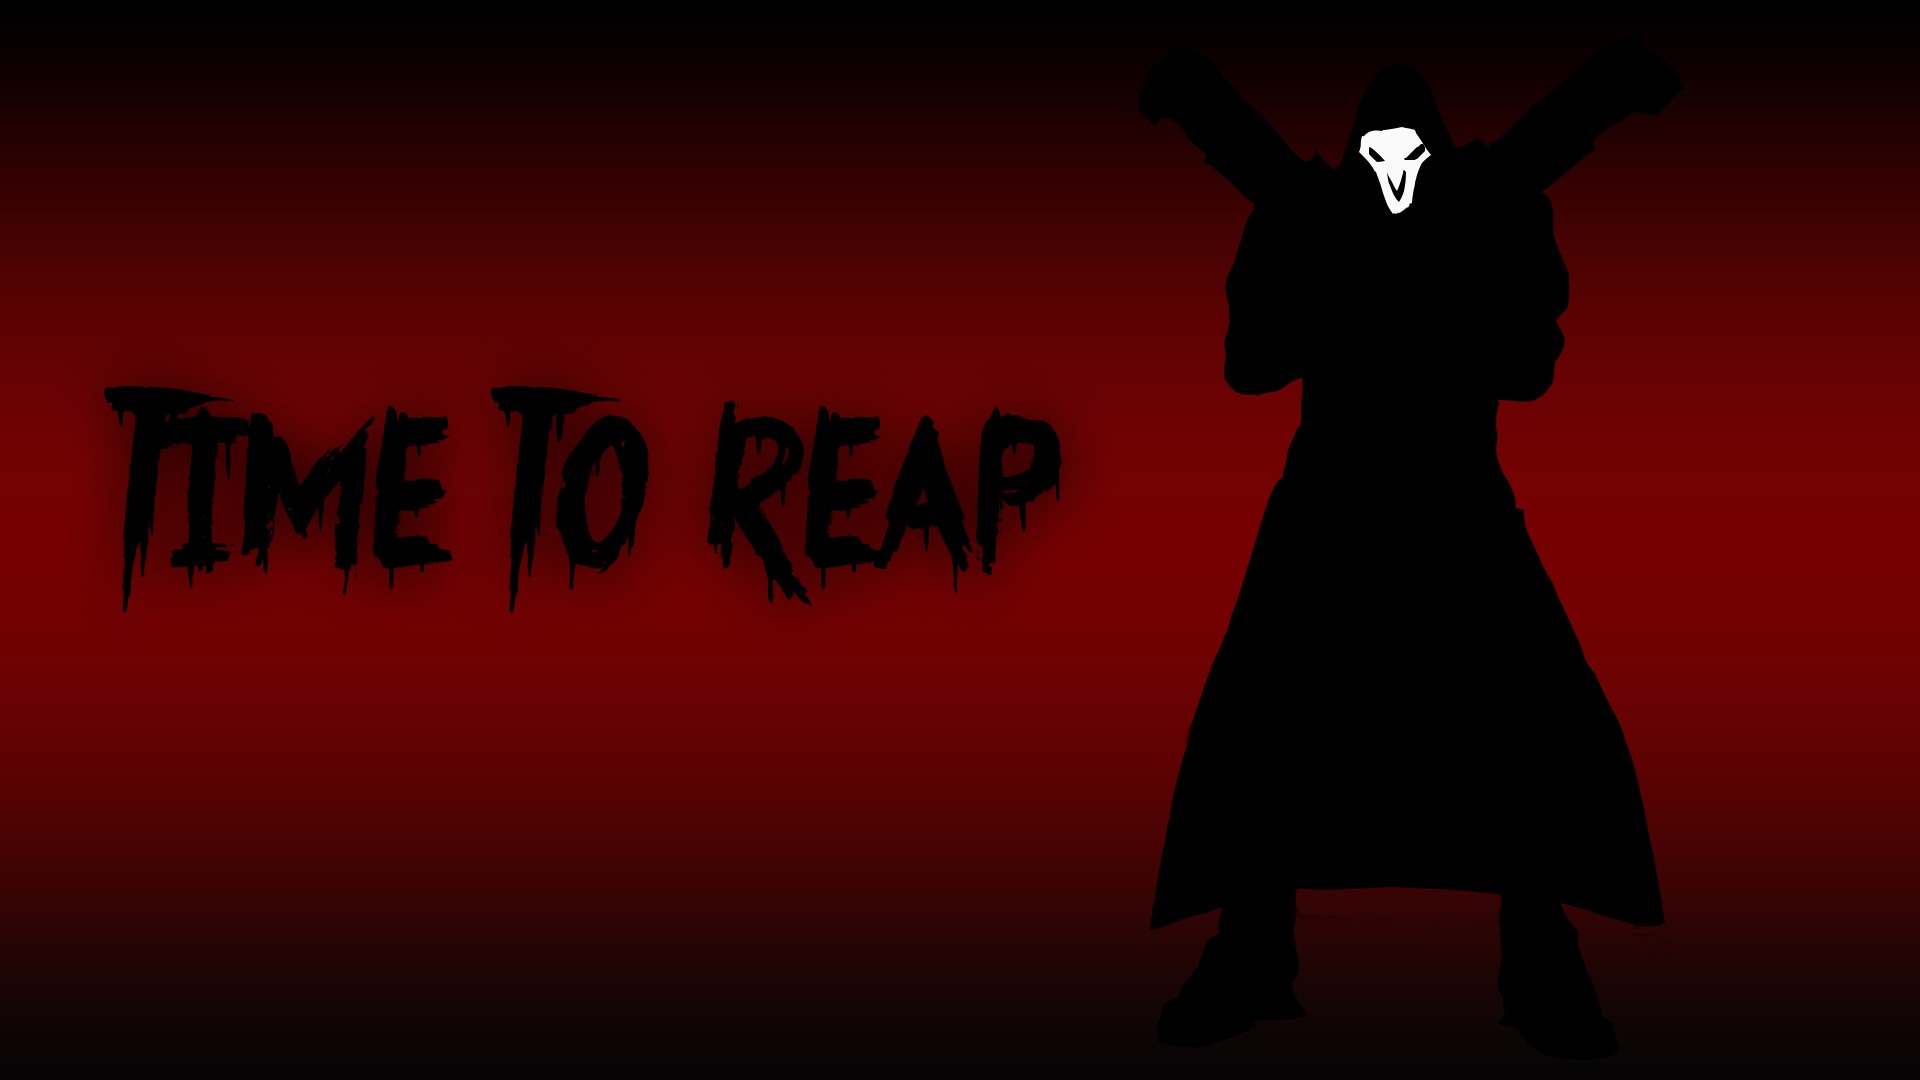 Reaper (Overwatch), Silhouette, Typography, Mask, Digital art, Red background Wallpaper